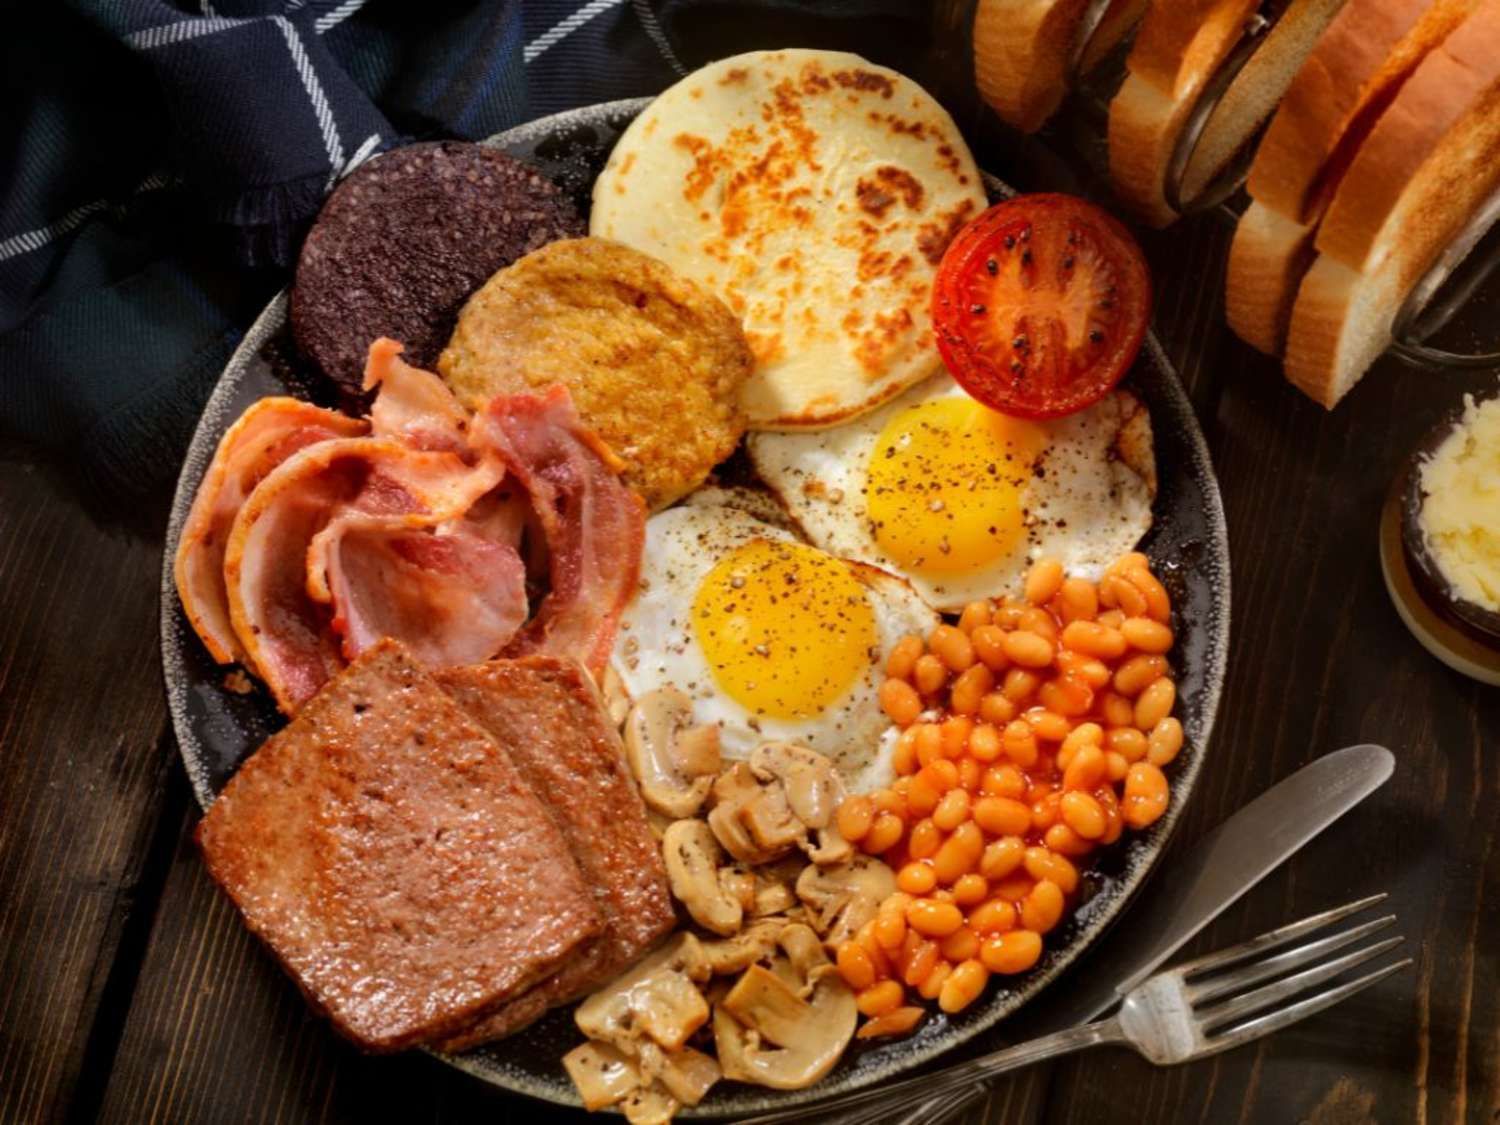 traditional scottish breakfast with beans, toast, eggs and more